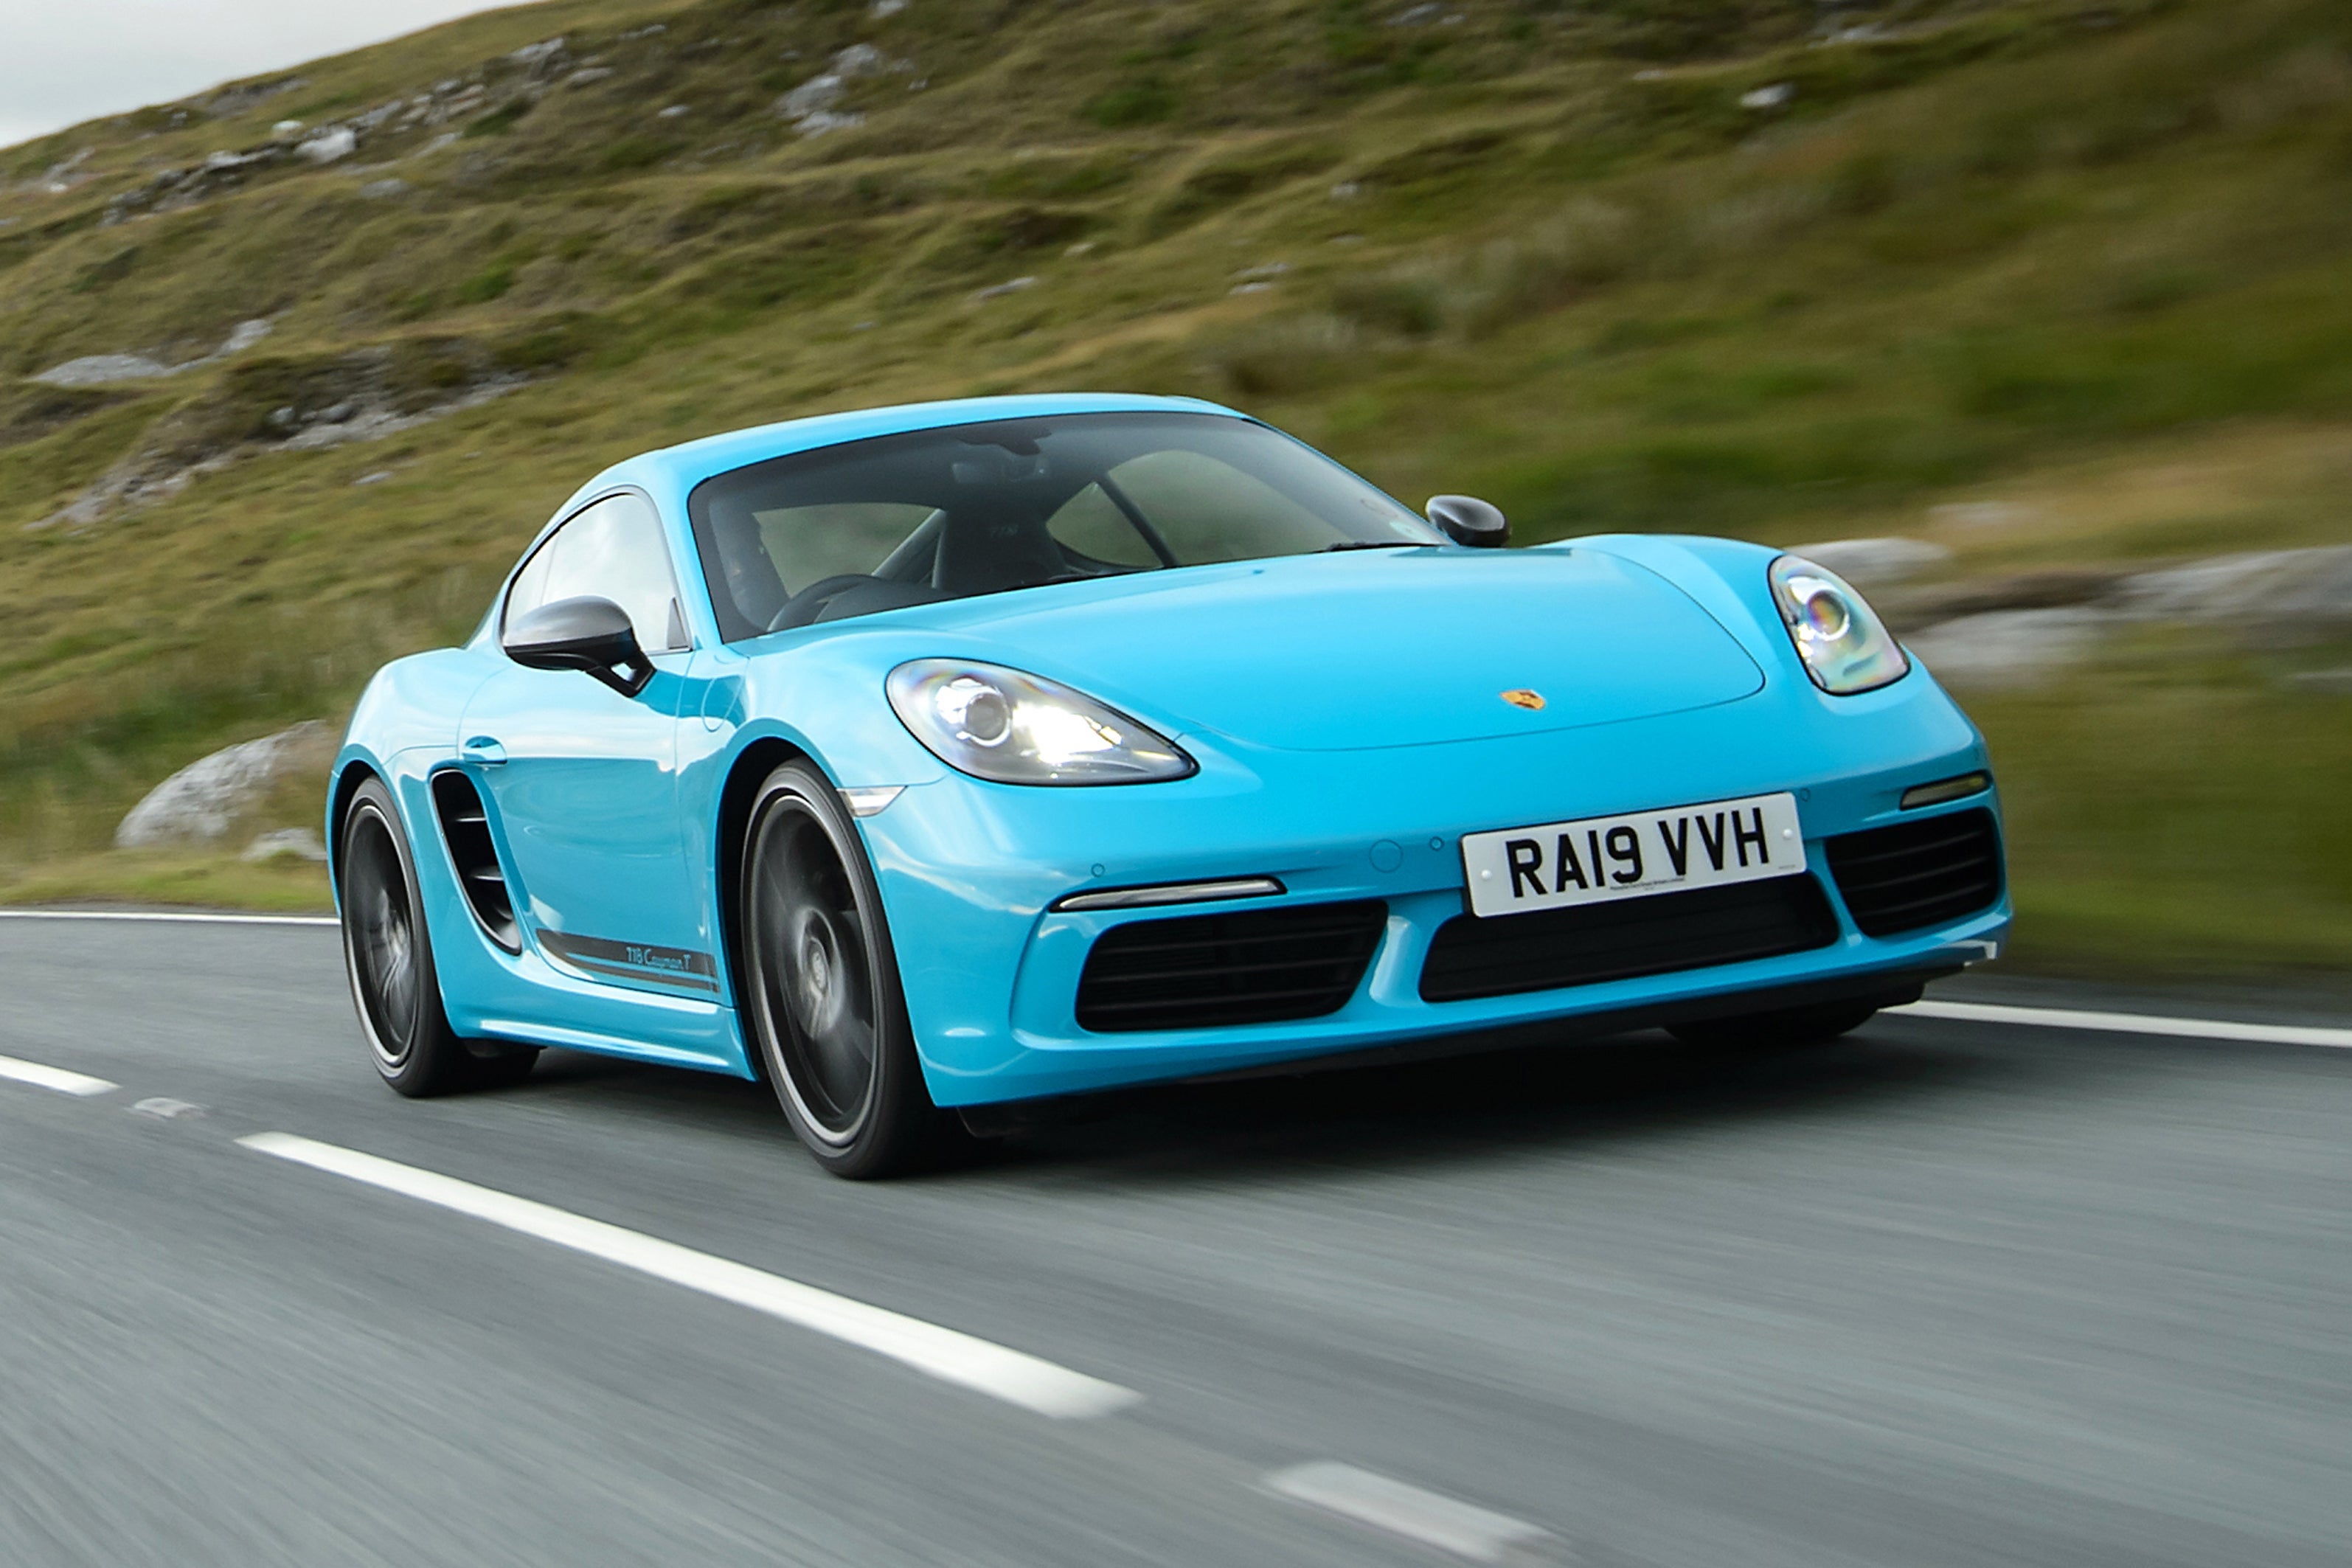 Porsche 718 Cayman Review 2023: exterior front three quarter photo of the Porsche 718 Cayman on the road